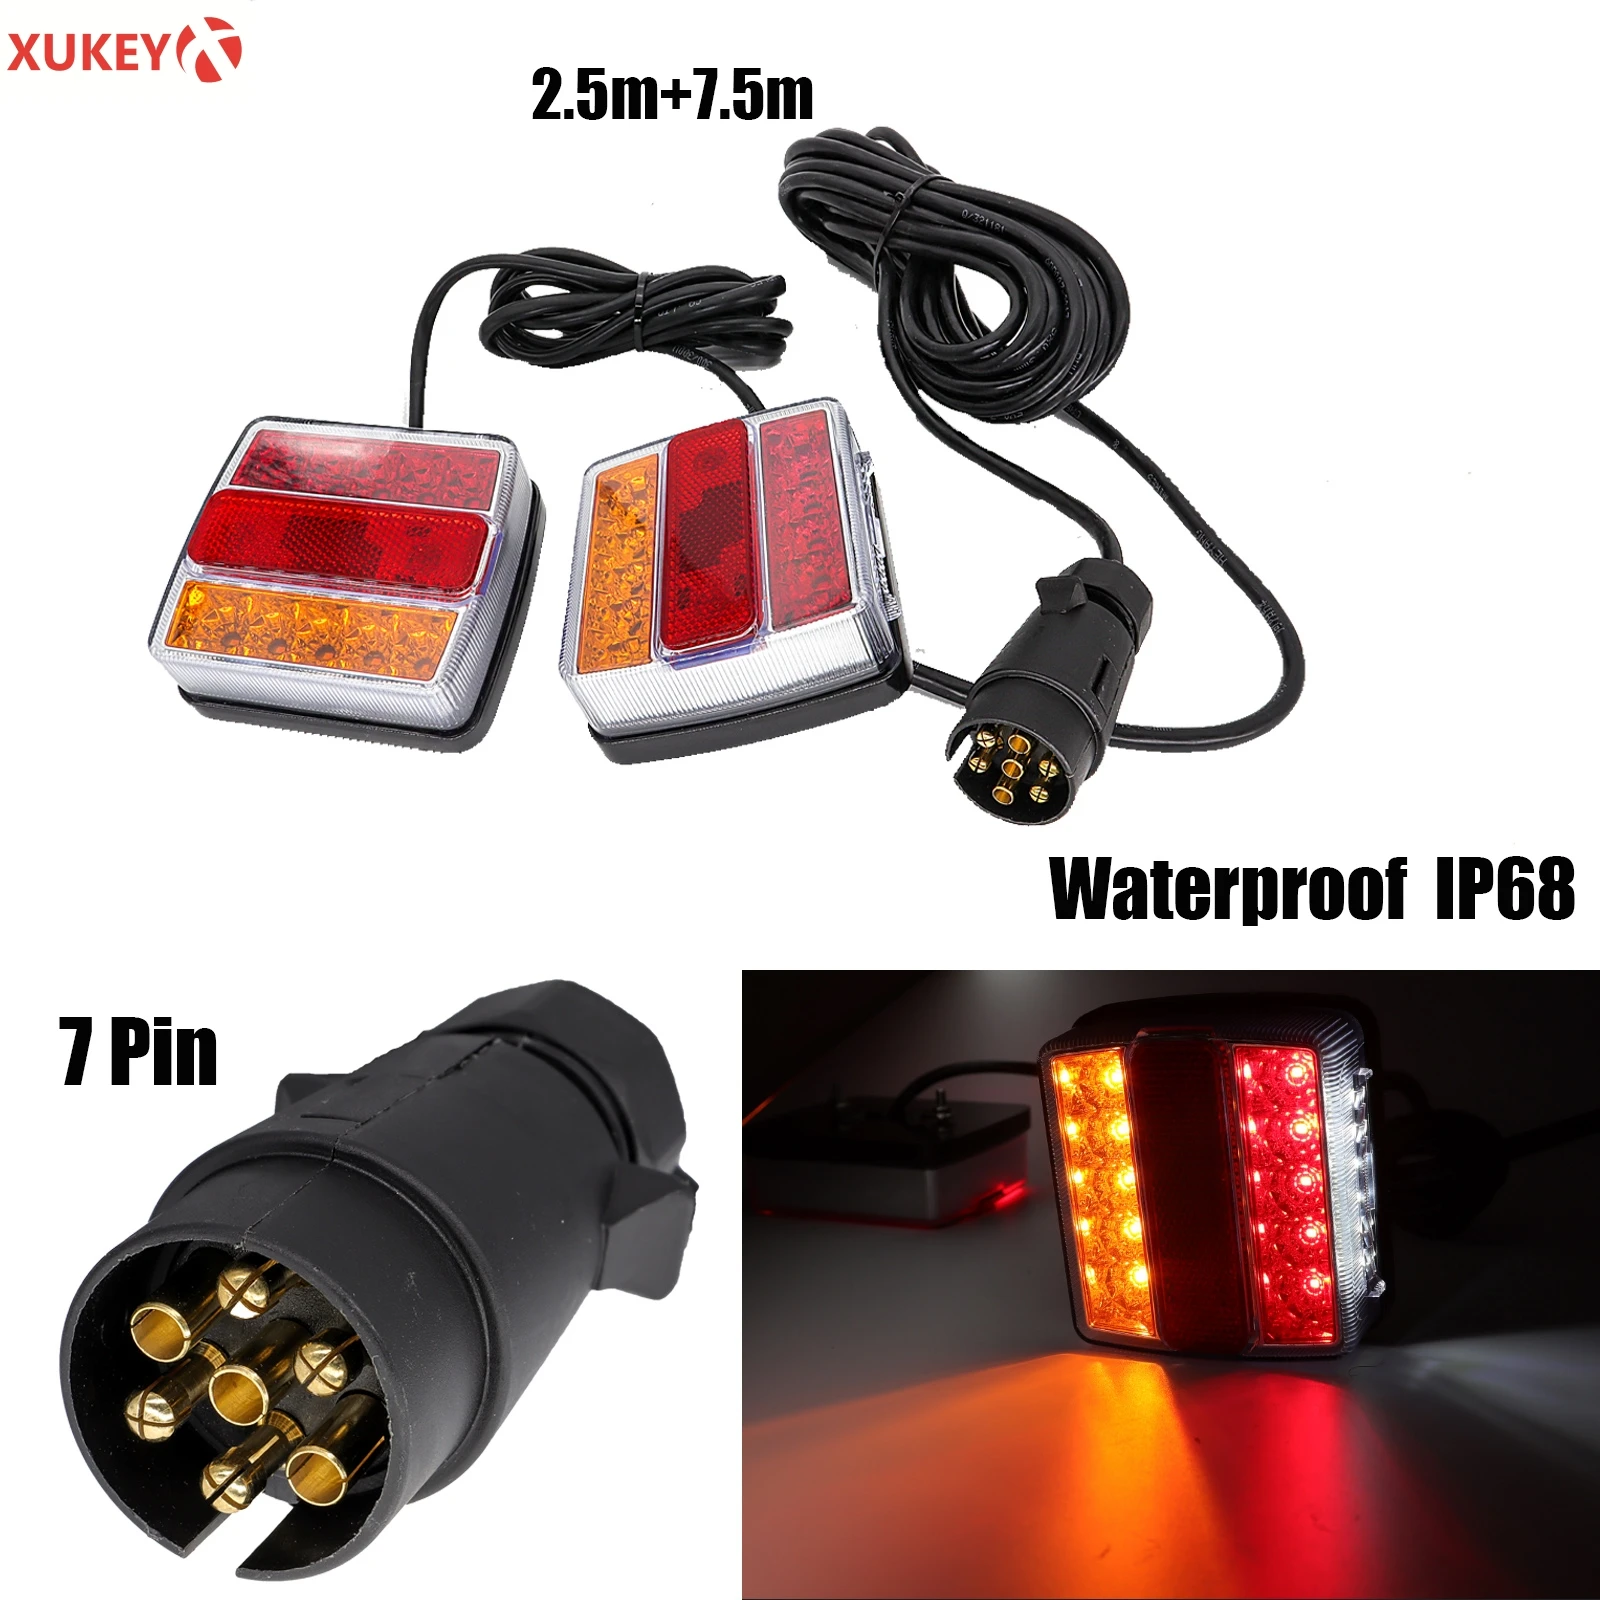 1 Set 10m 7 Pin Plug 12V 16 Led Trailer Towing Light Kit Rear Stop Tail Turn Signal Lights License Number Plate Lamp Truck RV sonoff m5 3c 80 smart wifi wall switch wireless light switch 3 gang app control separate touch switch eu plug